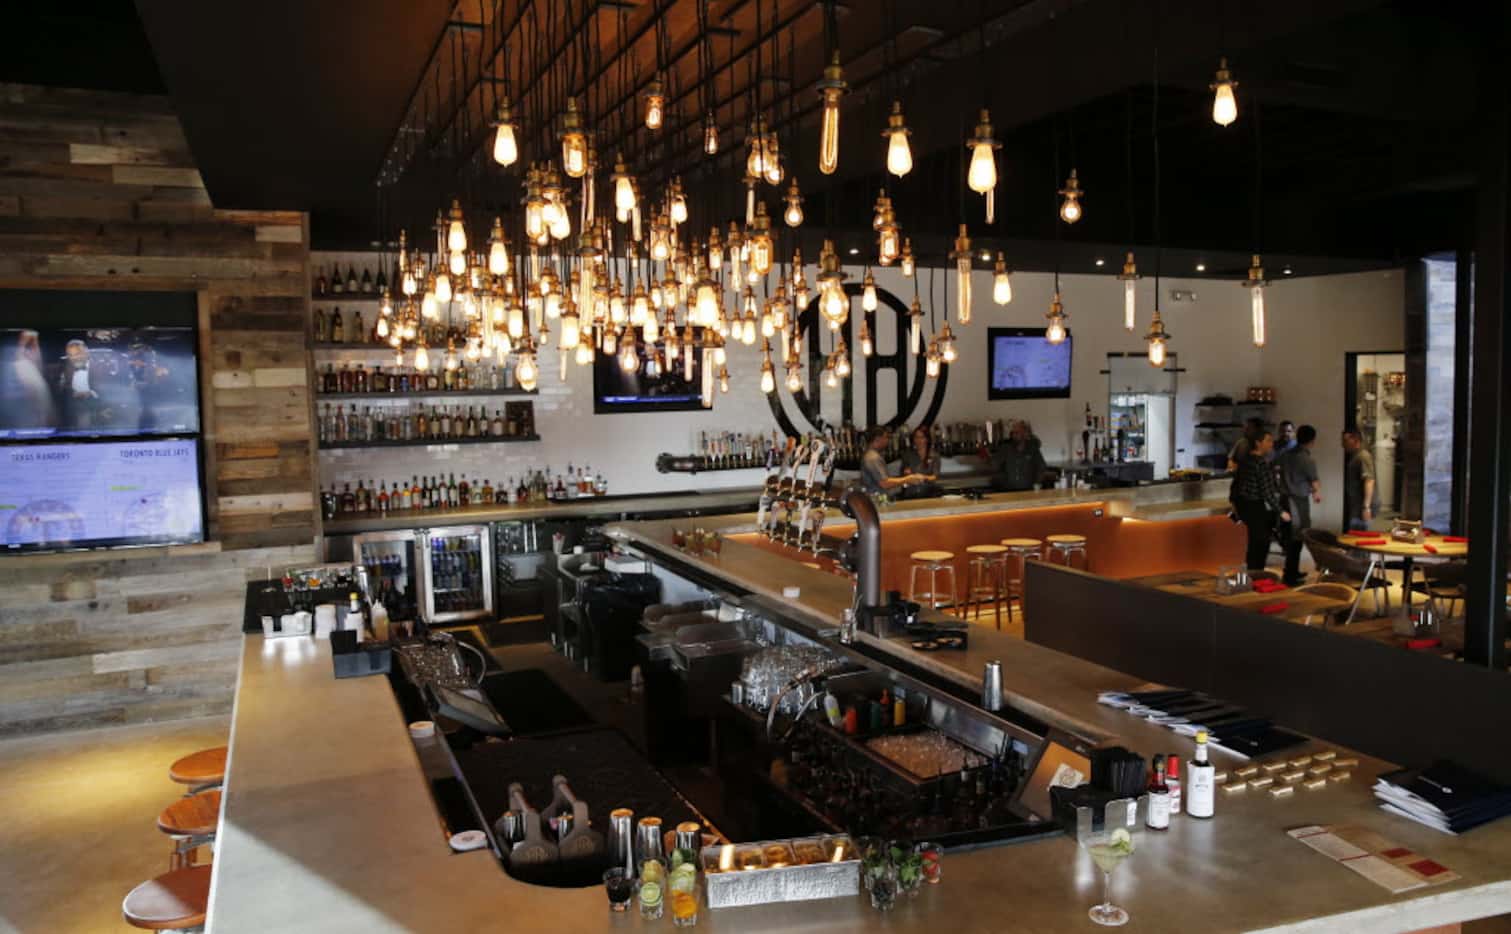 Main bar at the Happiest Hour in Dallas on Thursday, October 8, 2015. 50 beer taps are...